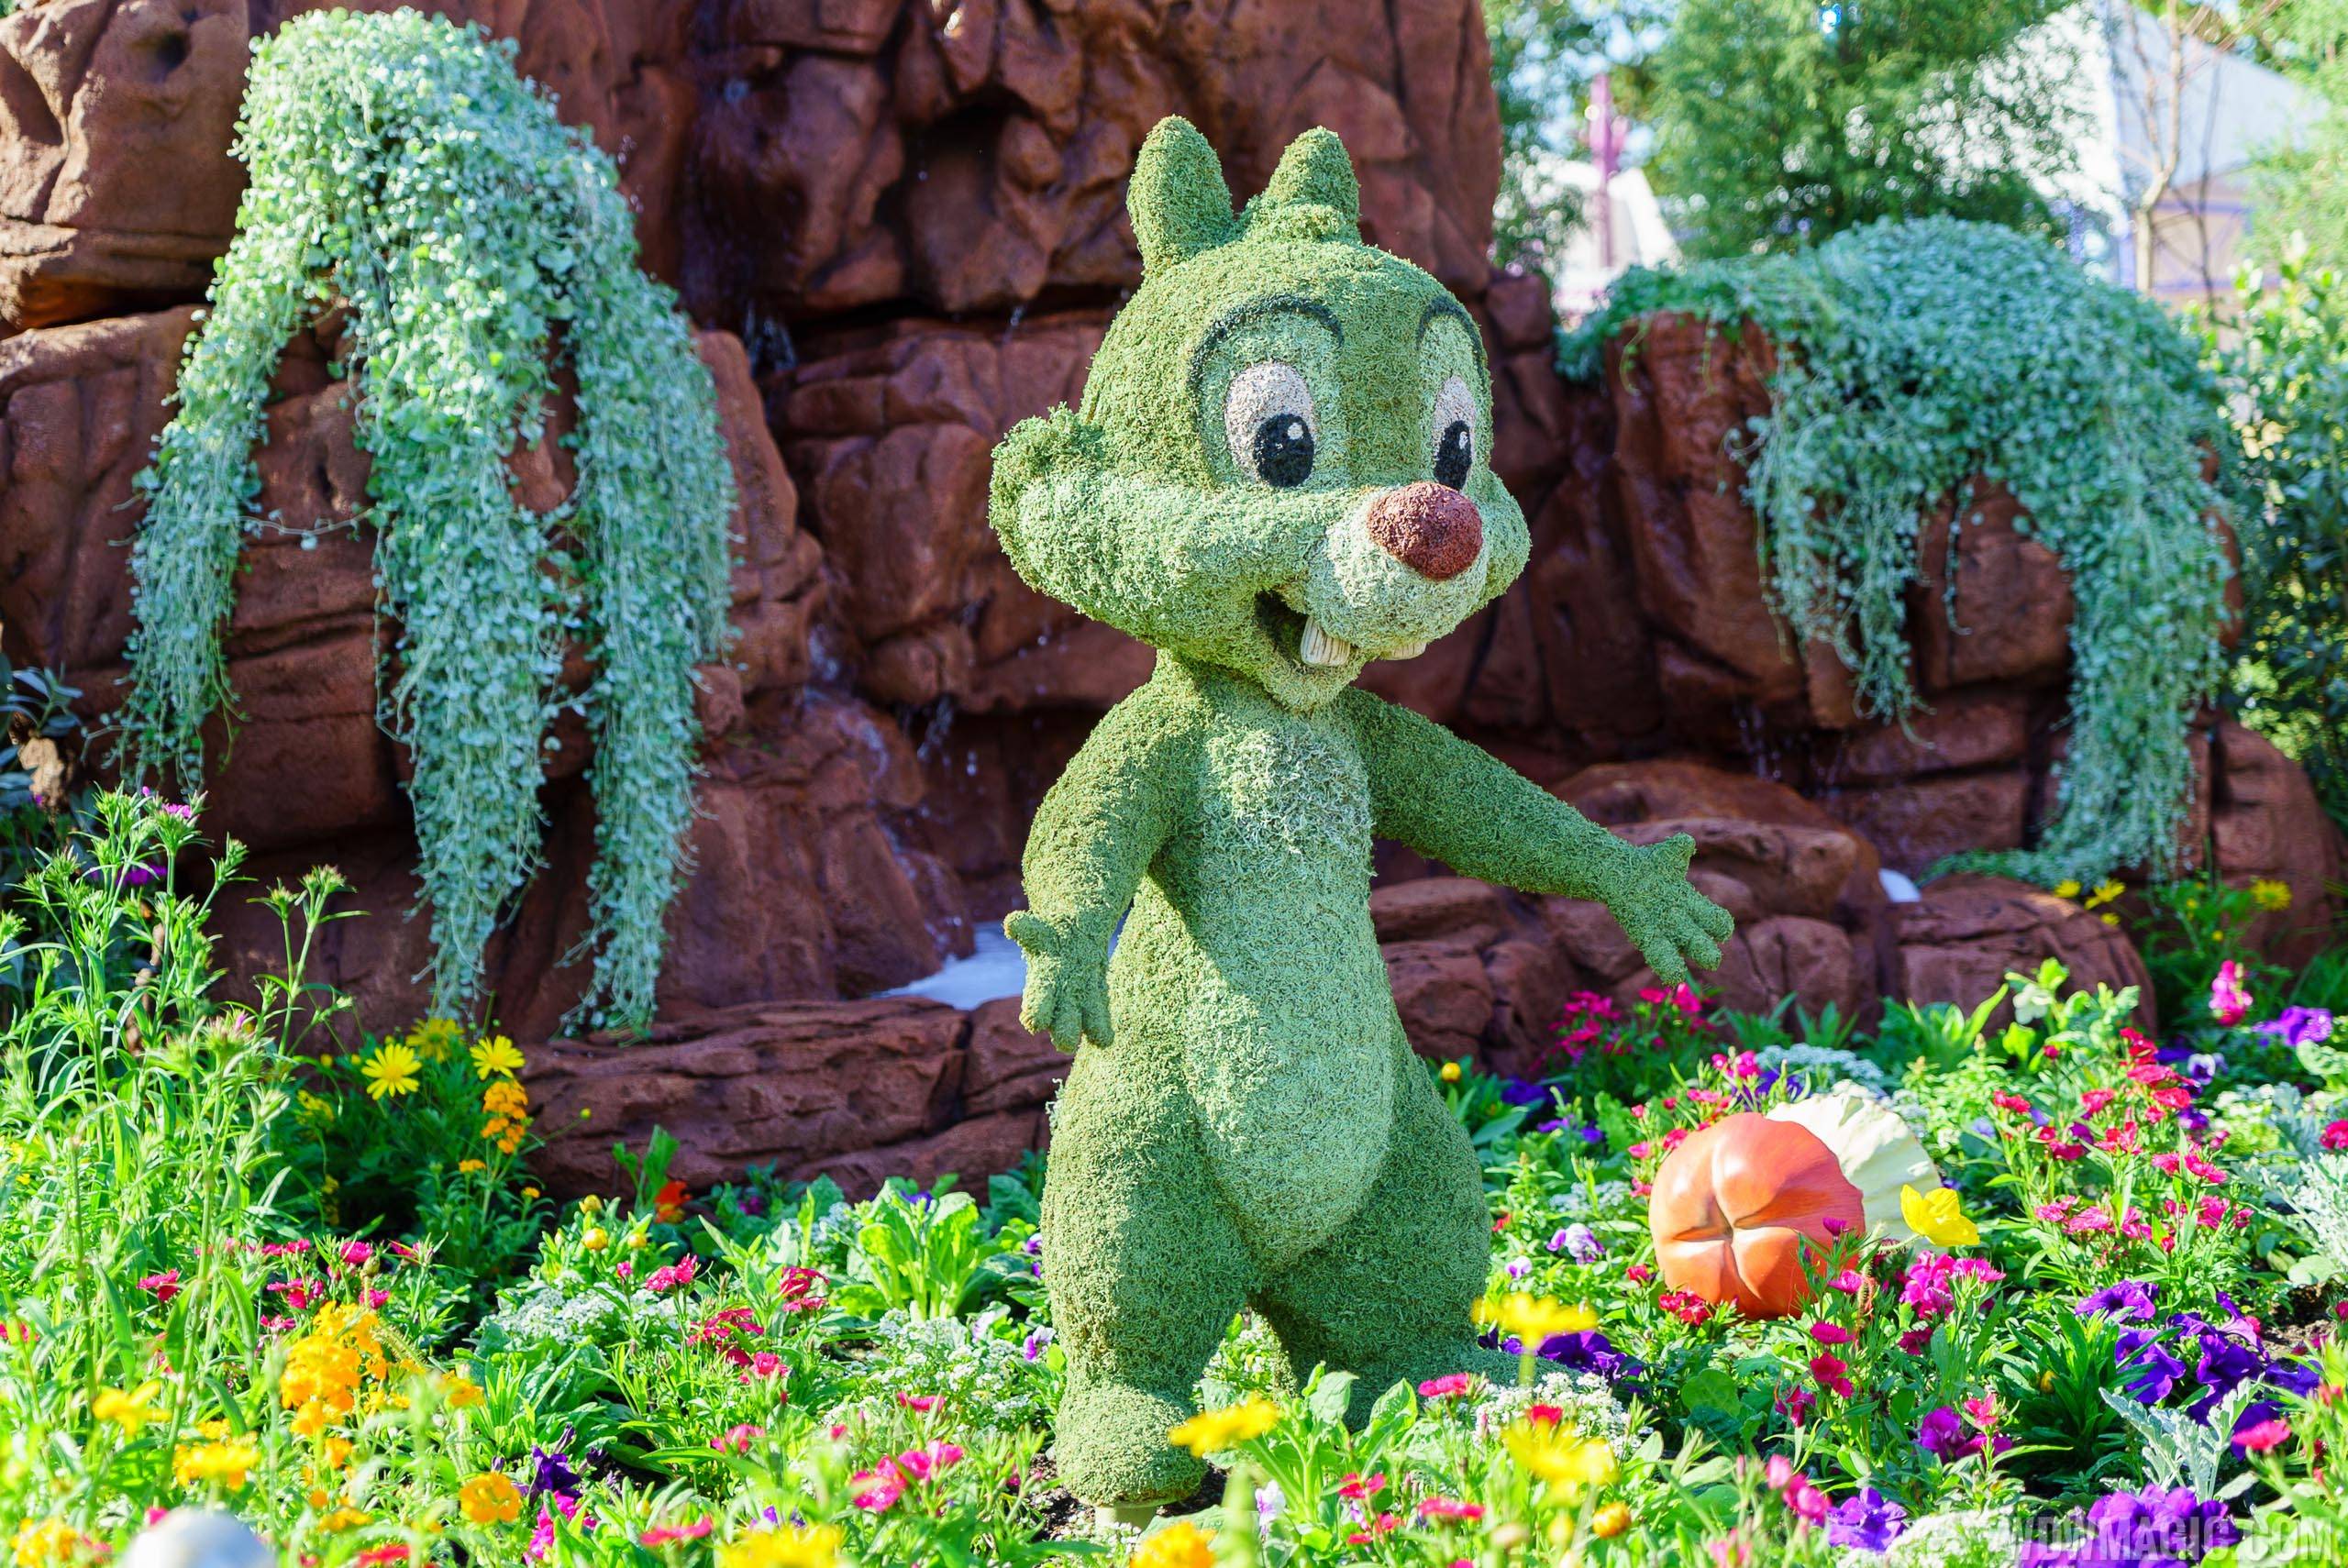 2016 Epcot International Flower and Garden Festival - Dale topiary